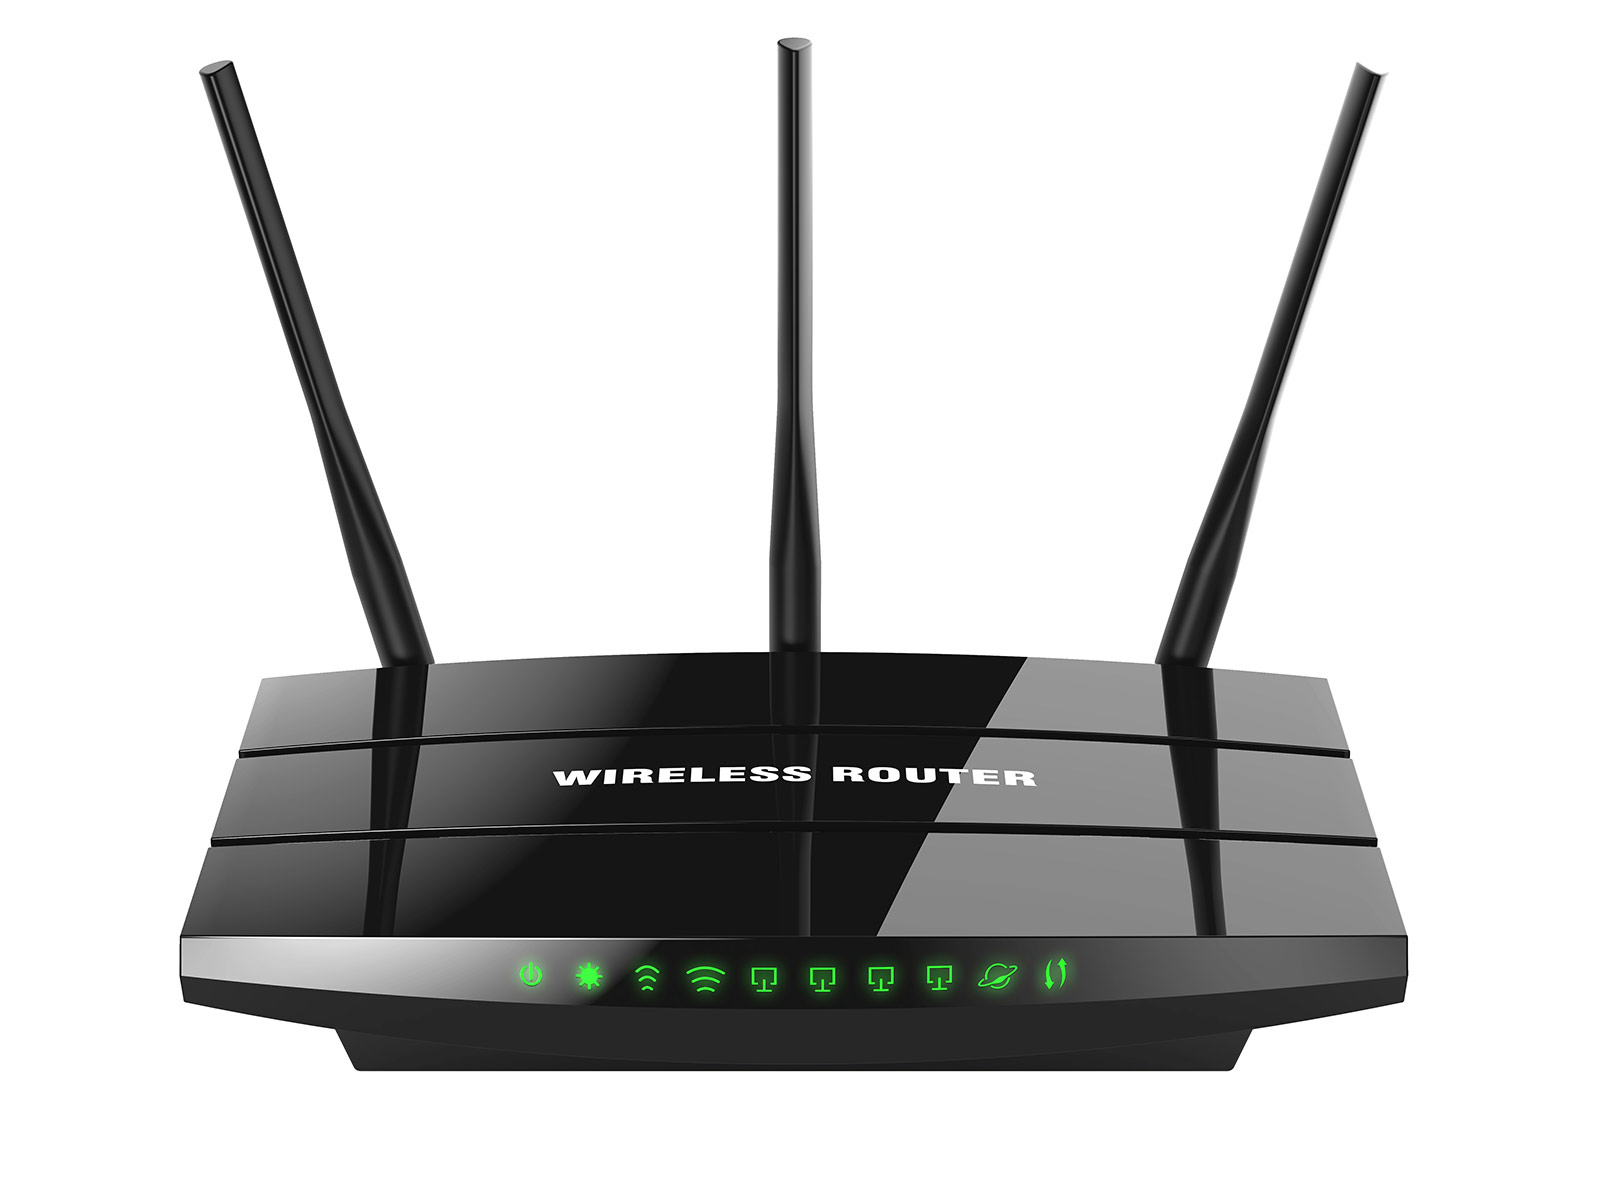 TP-Link router.